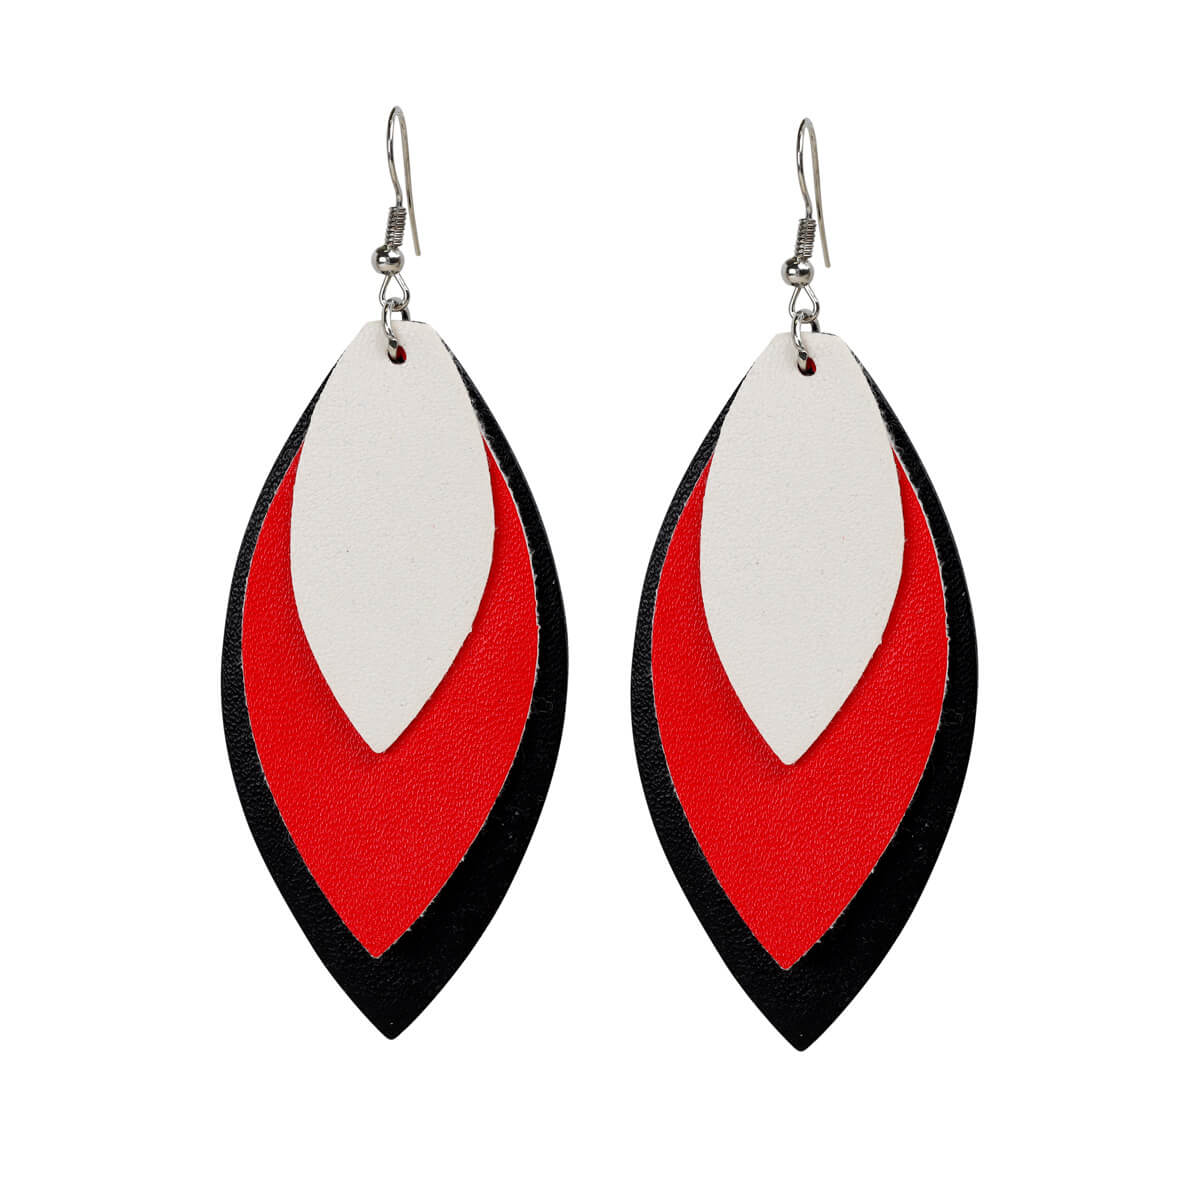 Tapers imitation leather earrings